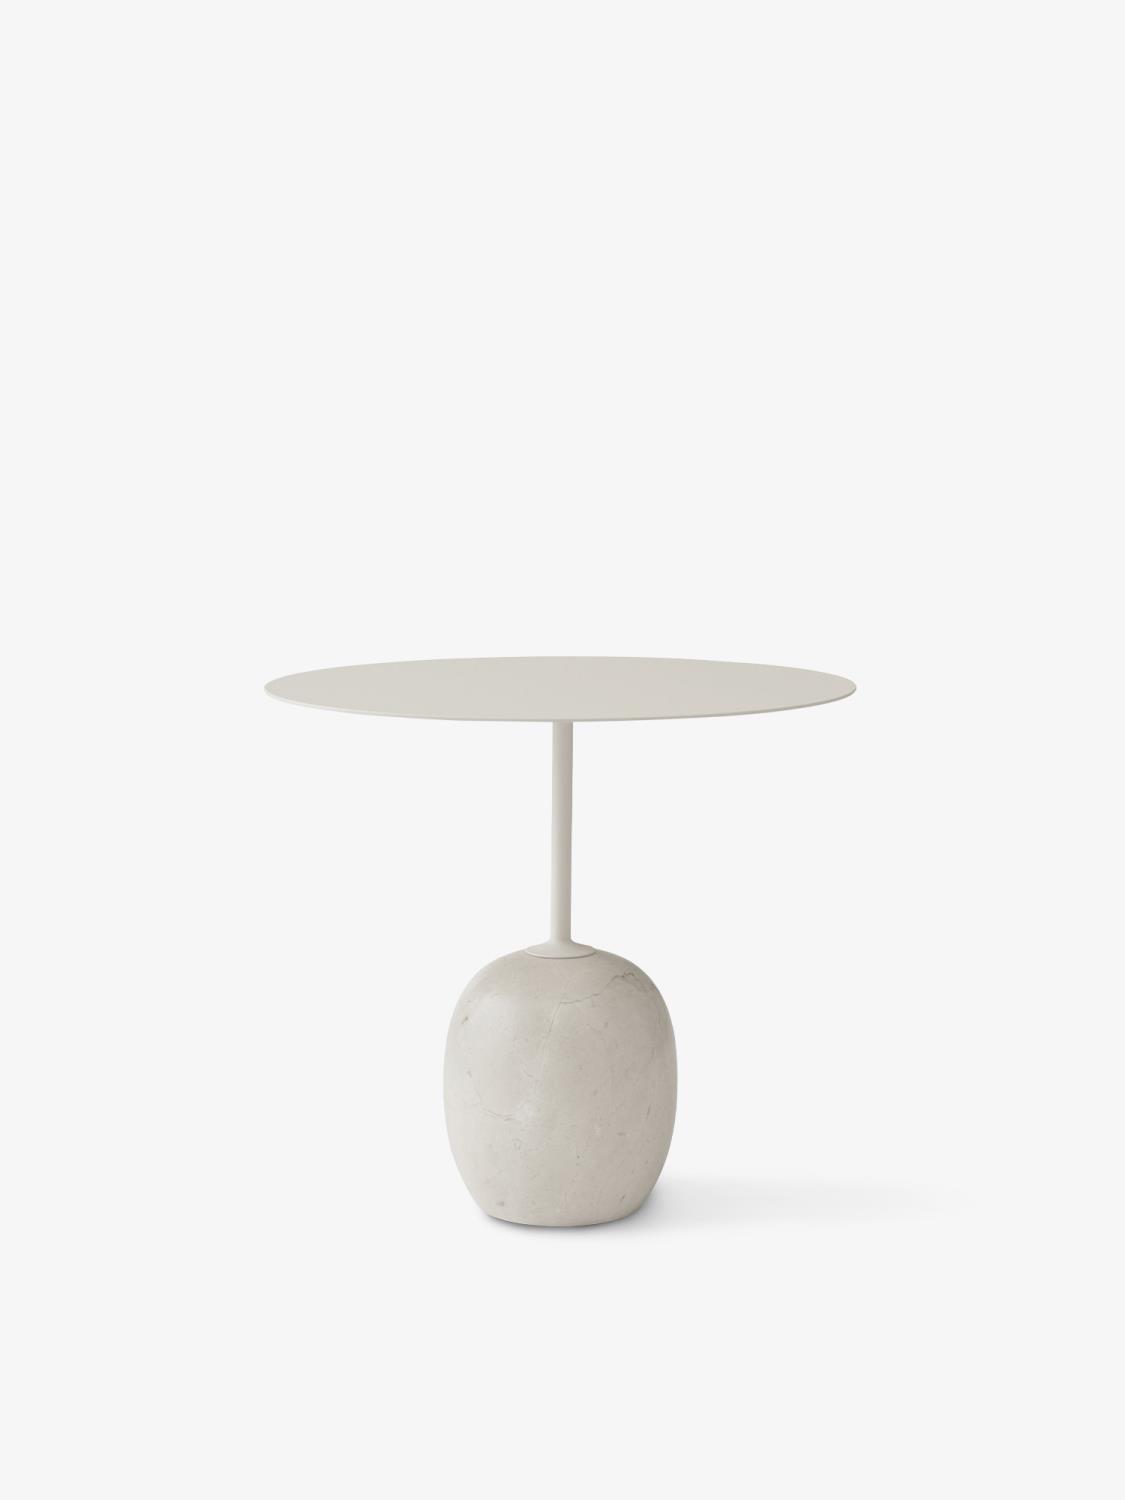 &Tradition - Lato Table LN9 - Oval - Ivory White and Crema Diva Marble